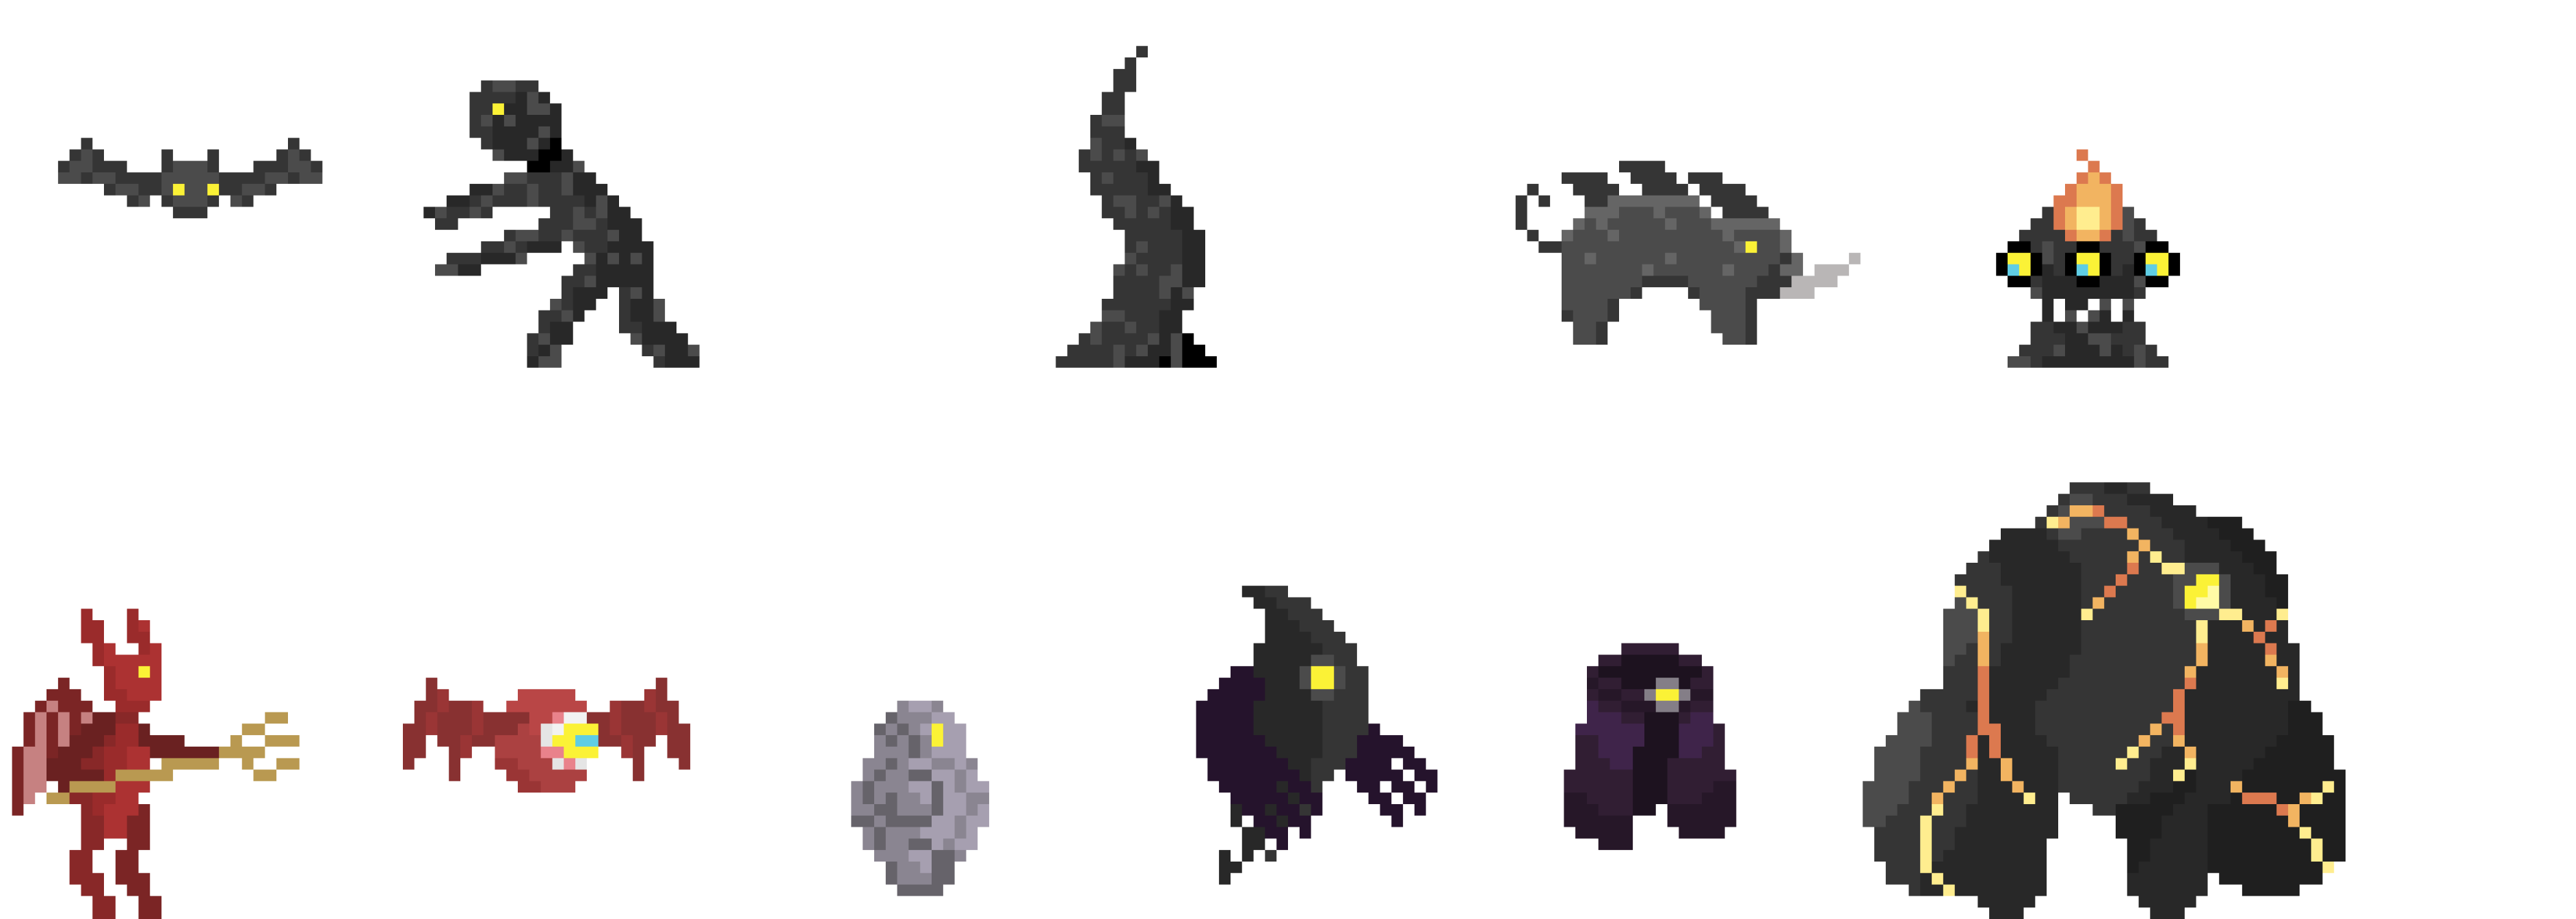 Assorted enemy designs for Tower of Ash.